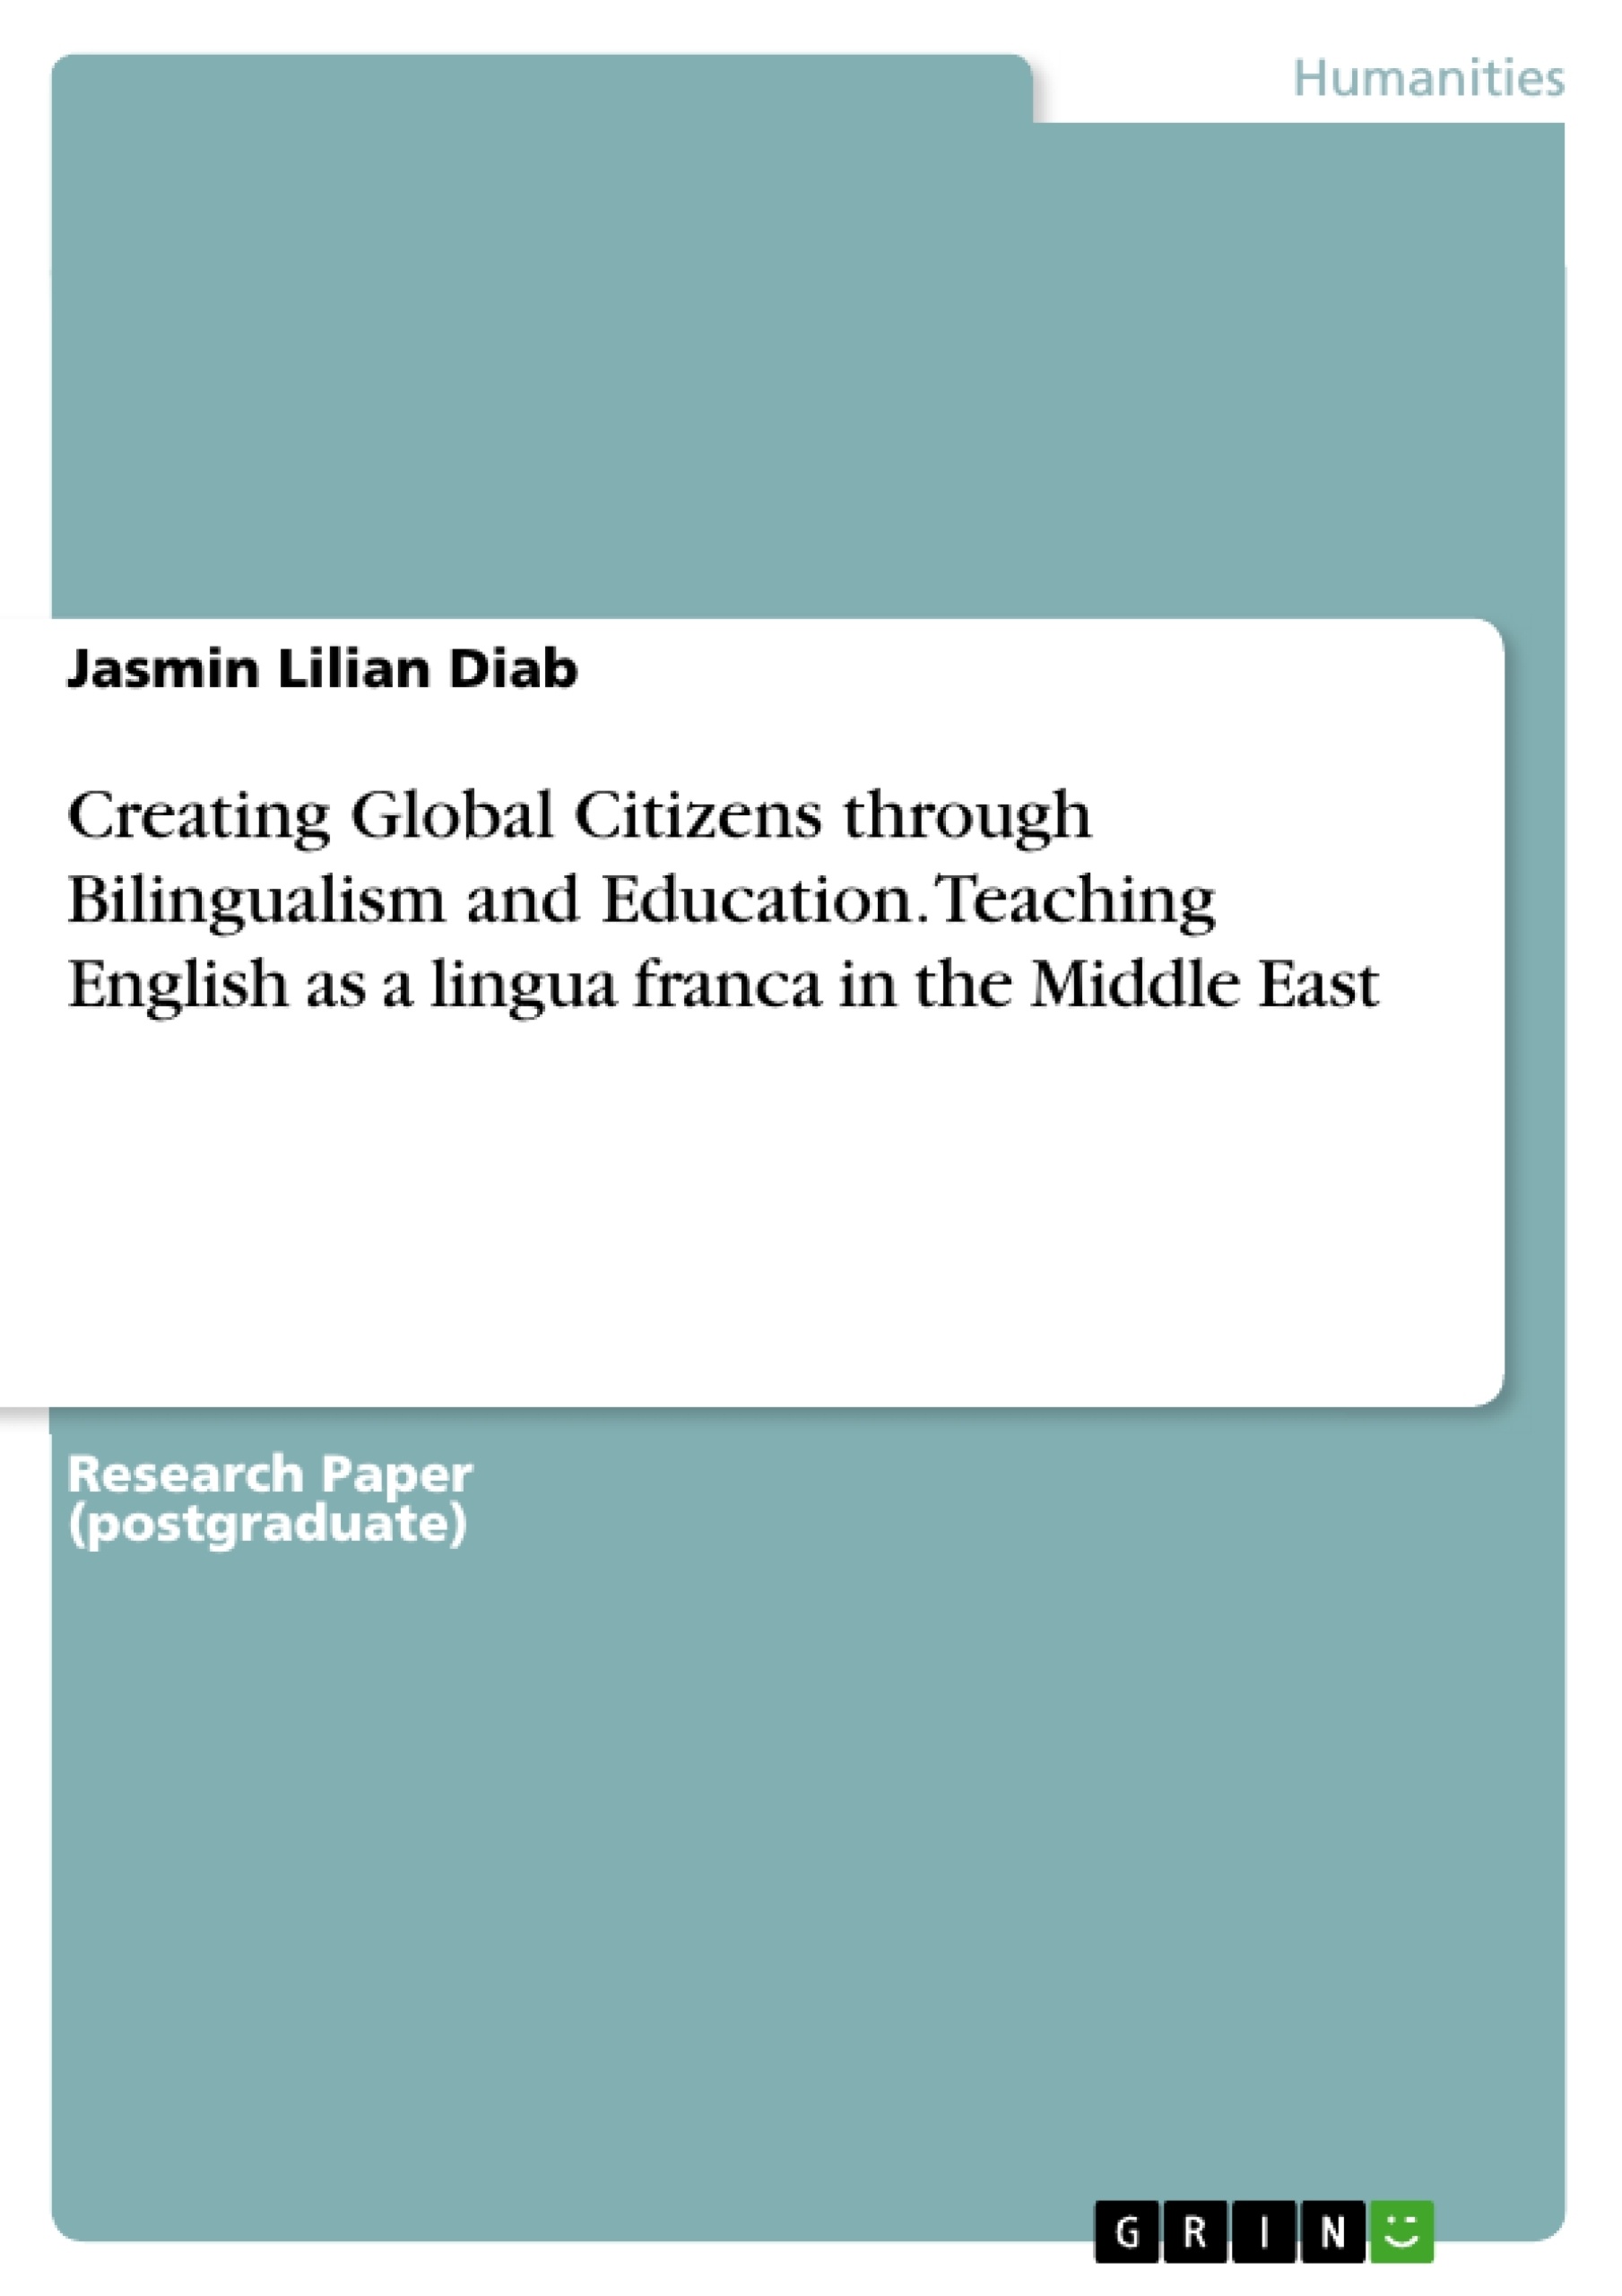 Title: Creating Global Citizens through Bilingualism and Education. Teaching English as a lingua franca in the Middle East